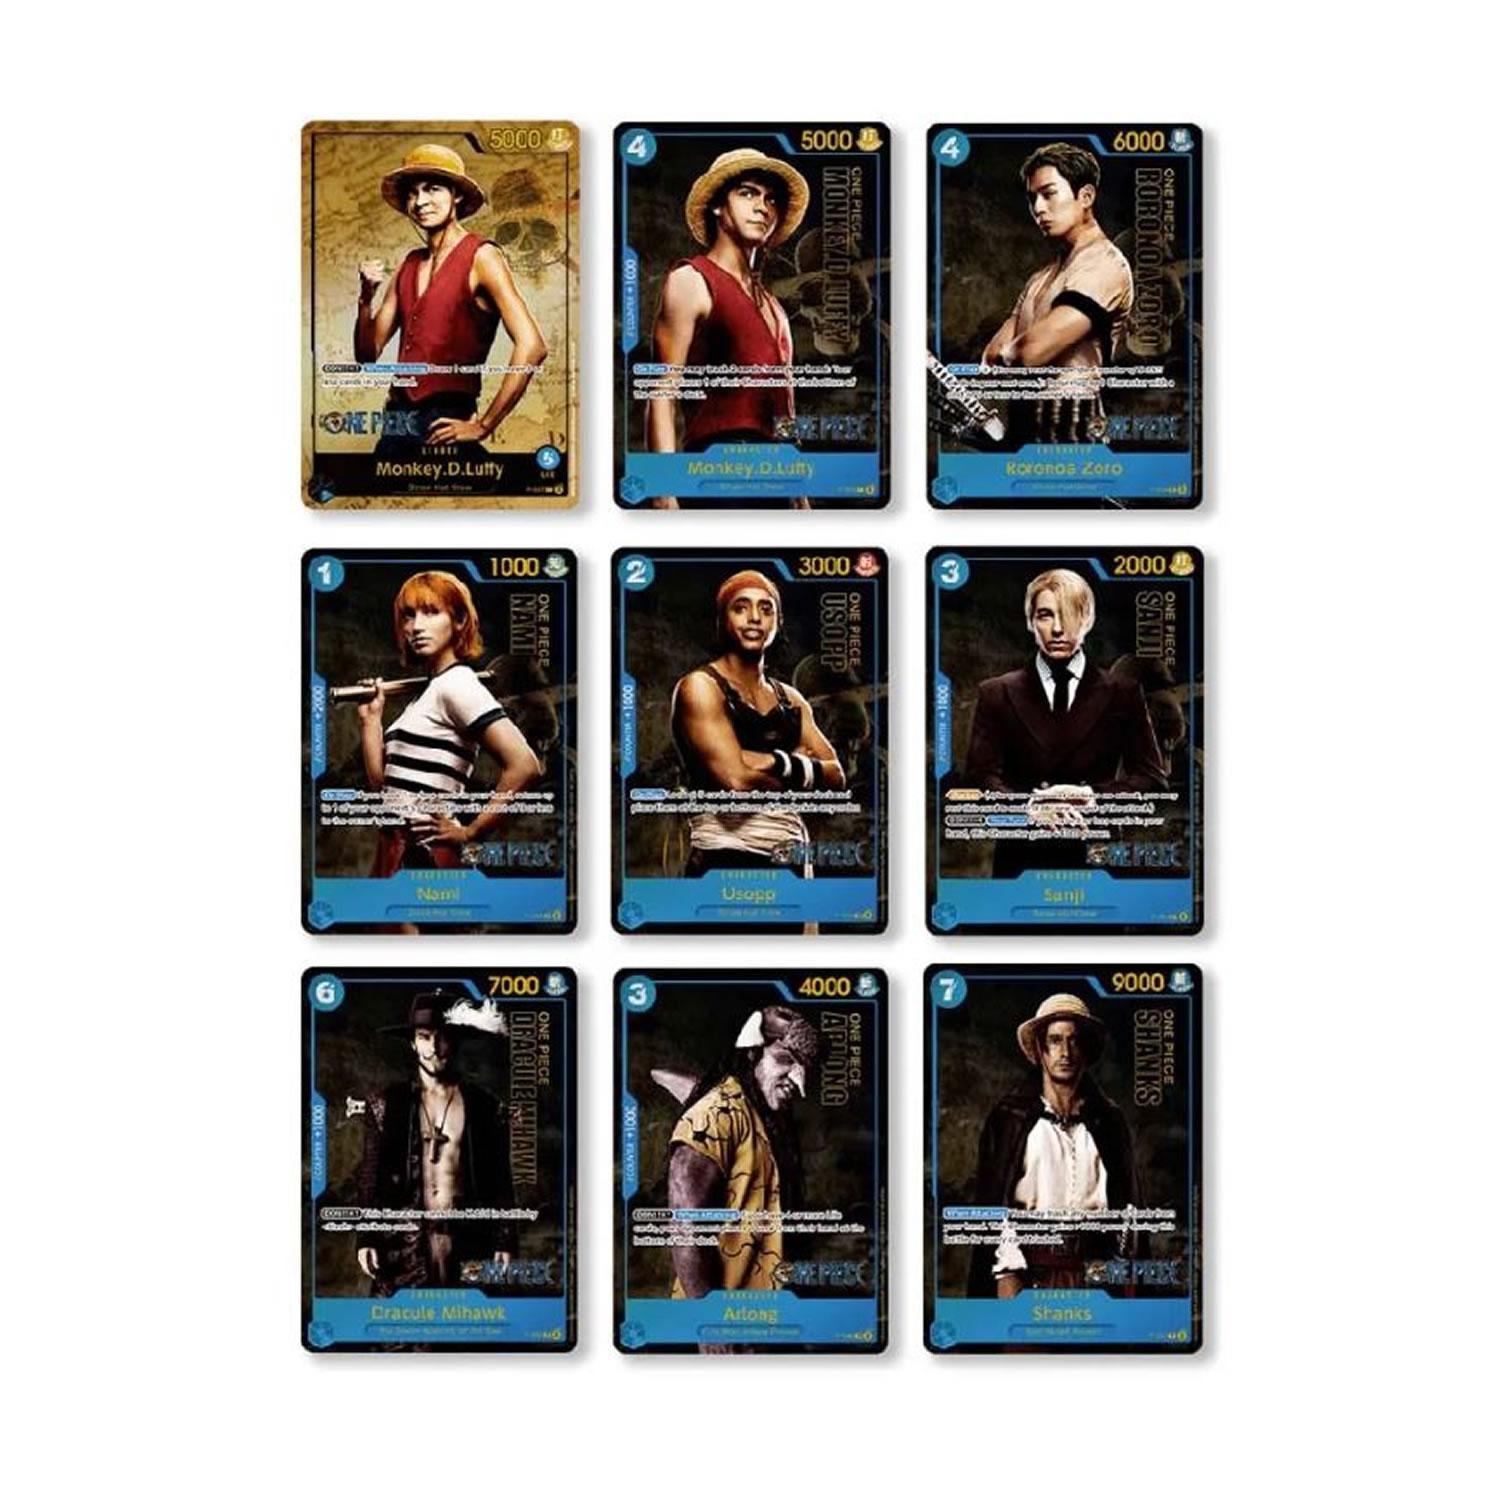 One Piece Card Game Premium Card Collection - Live Action Edition Card Images